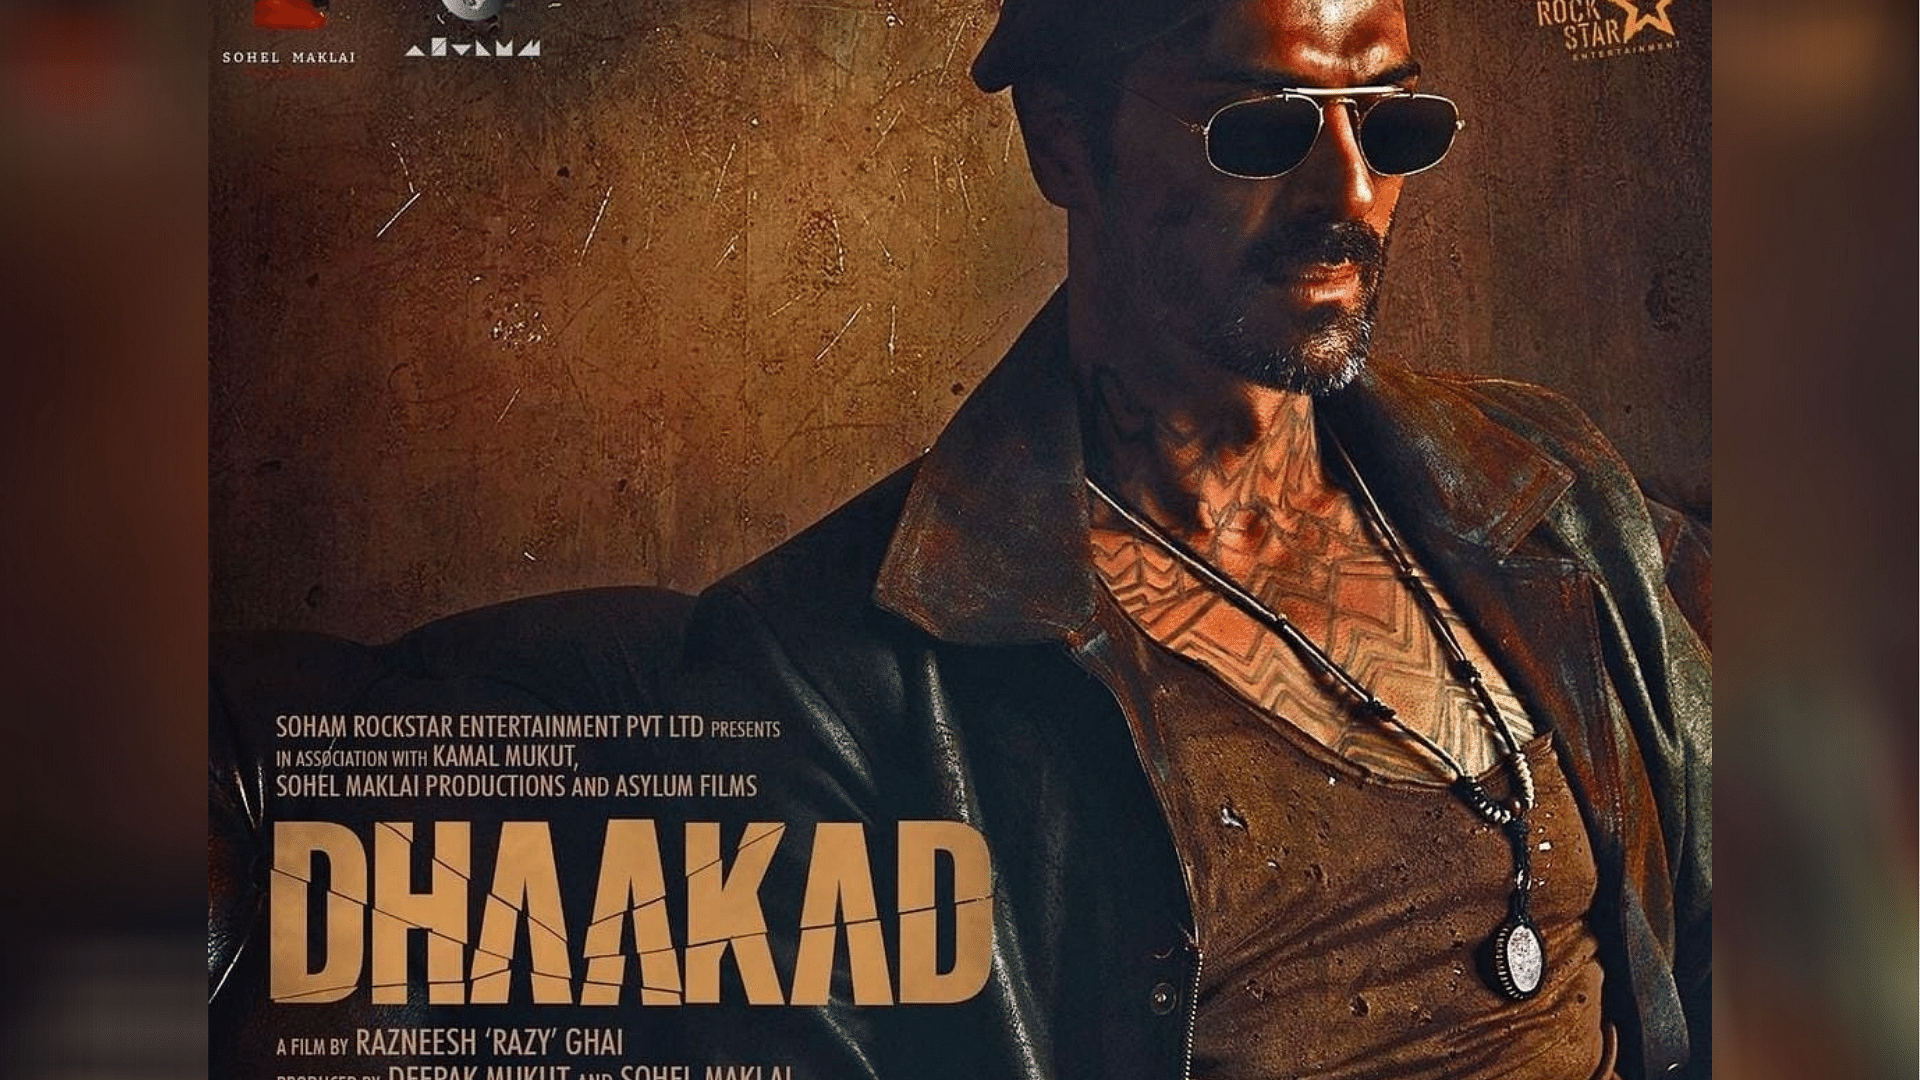 Arjun Rampal in a poster for <i>Dhaakad</i>.